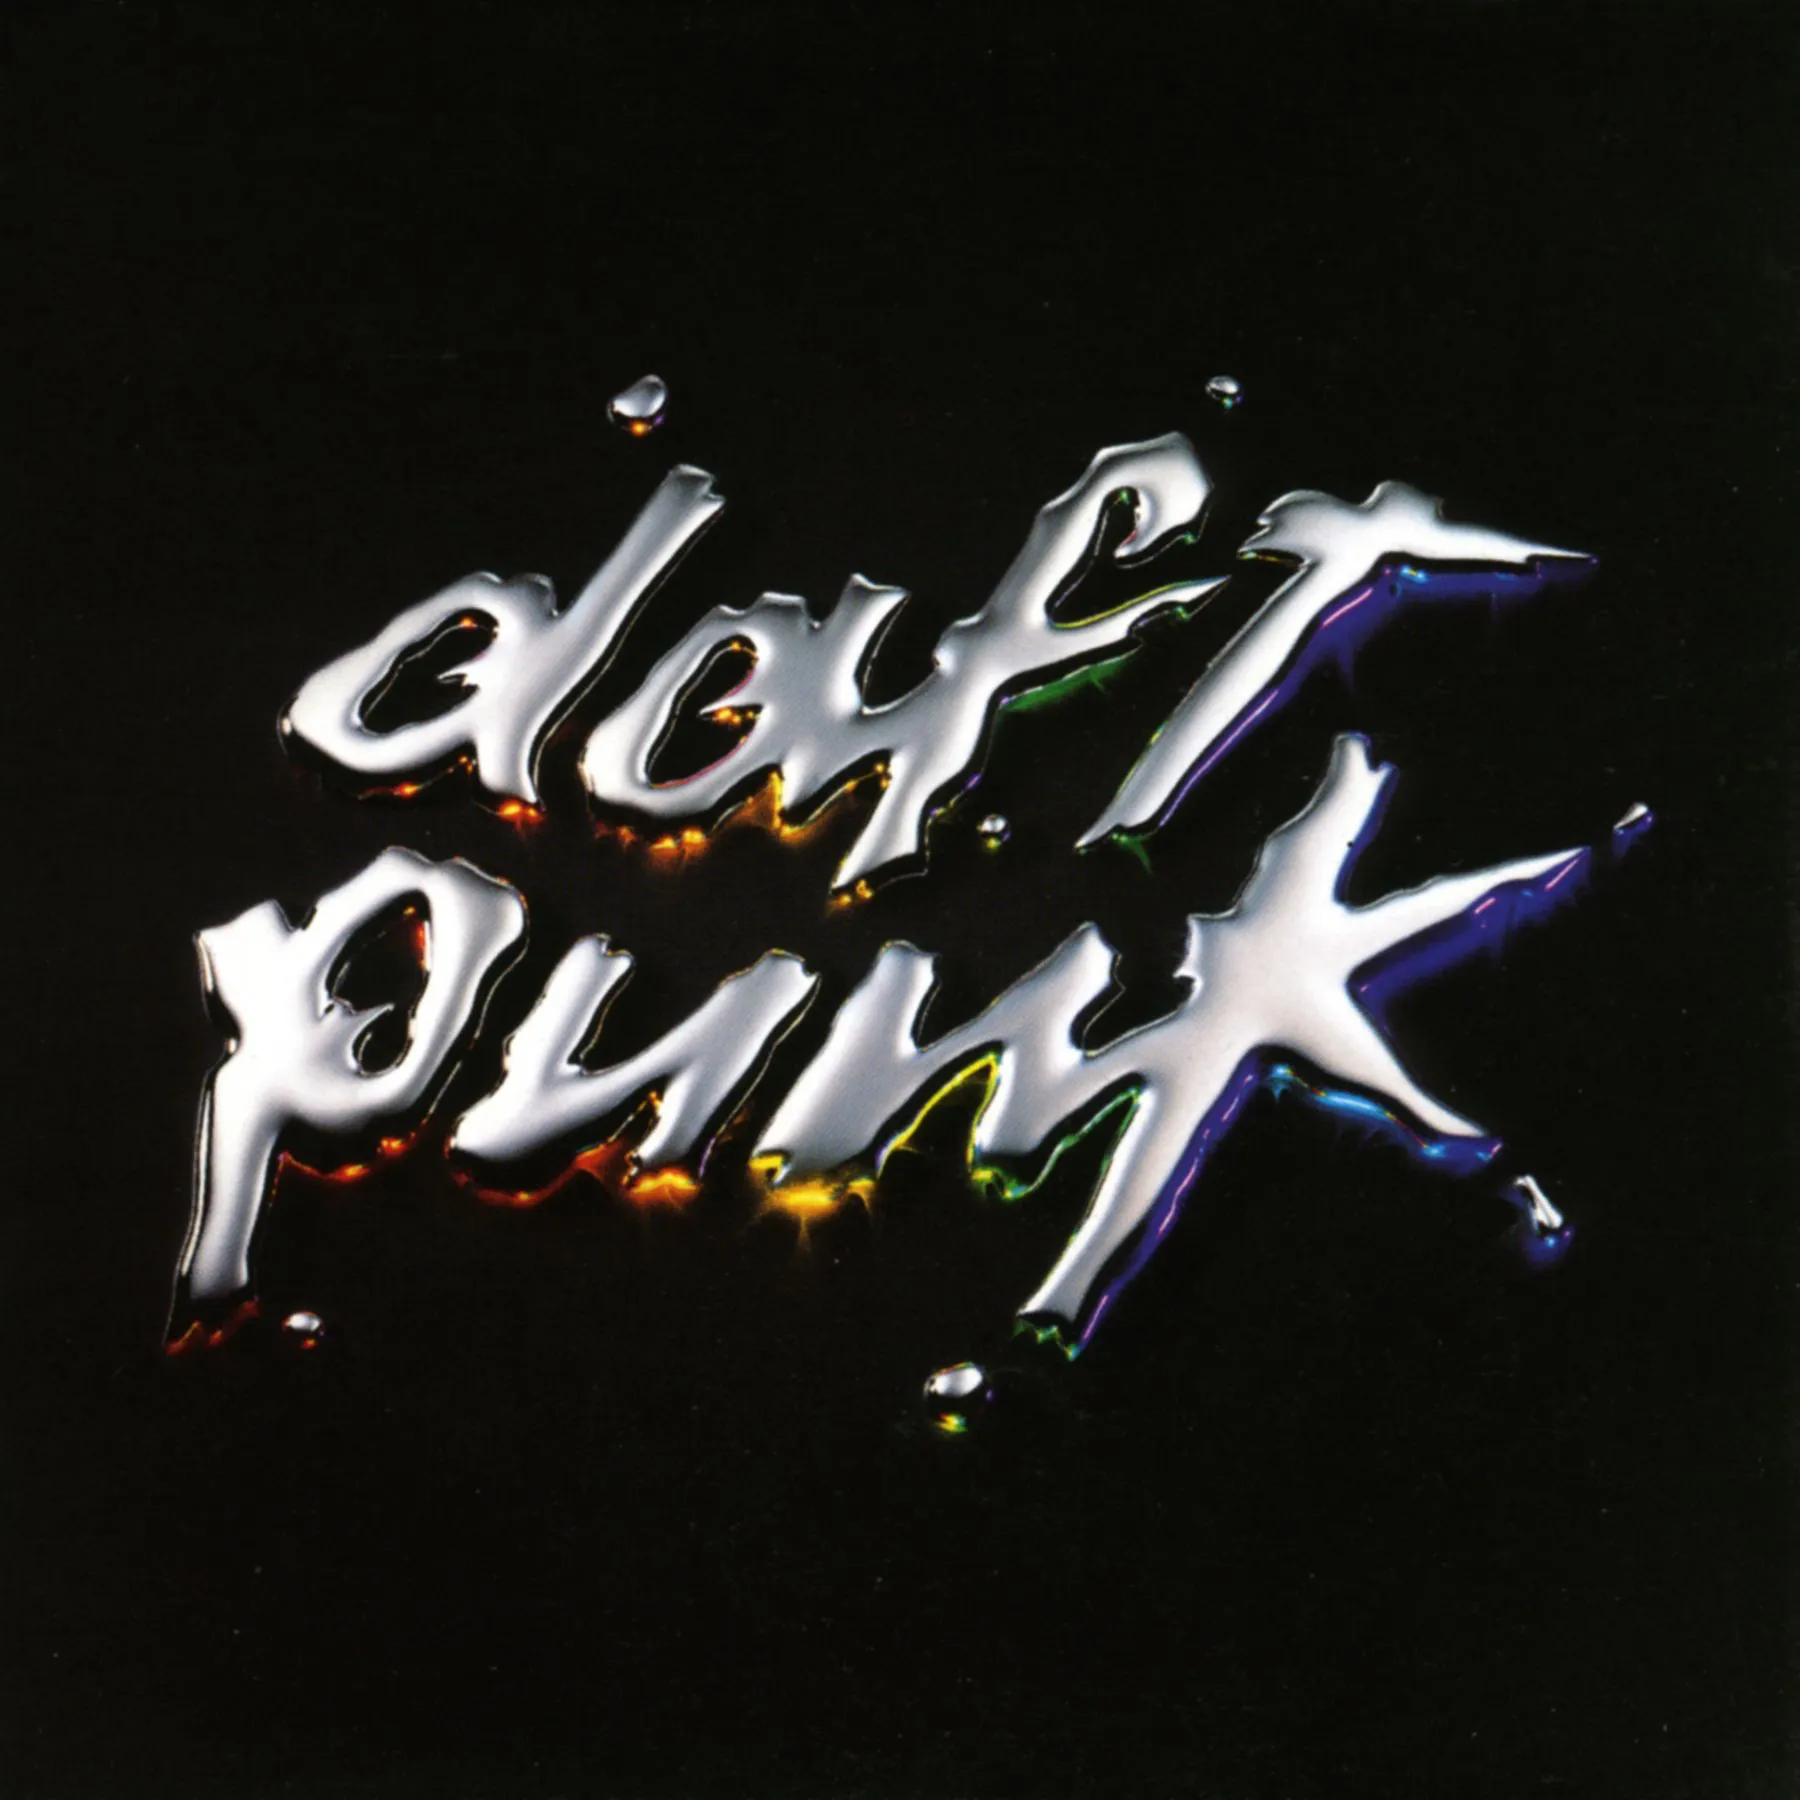 <strong>Daft Punk - Discovery</strong> (Vinyl LP - black)